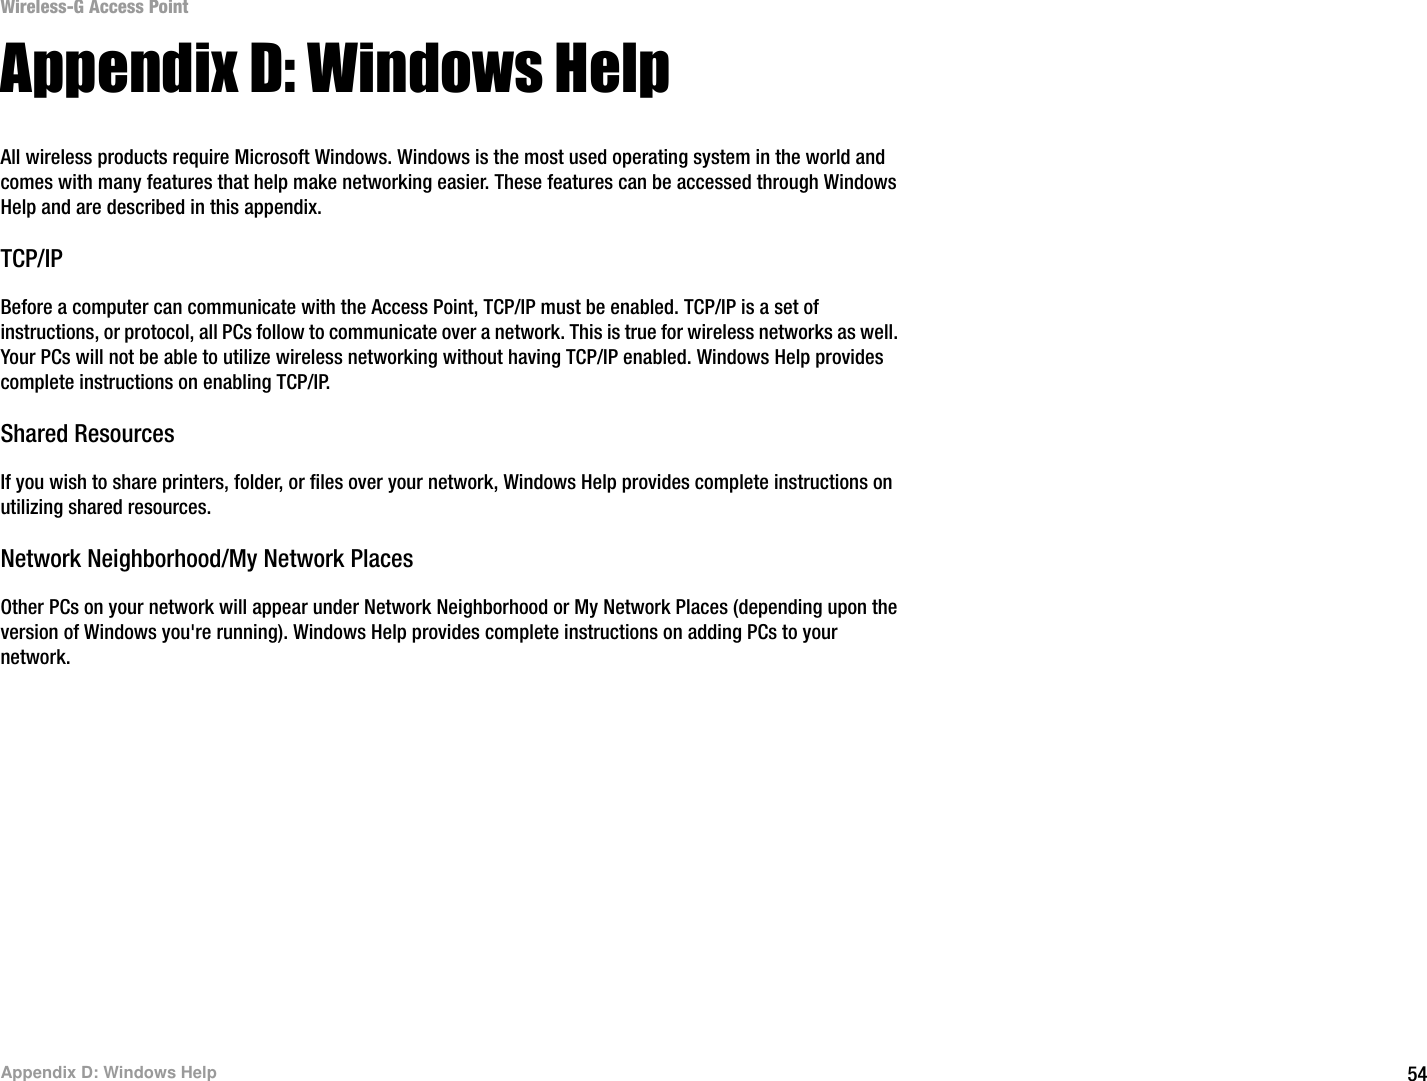 54Appendix D: Windows HelpWireless-G Access PointAppendix D: Windows HelpAll wireless products require Microsoft Windows. Windows is the most used operating system in the world and comes with many features that help make networking easier. These features can be accessed through Windows Help and are described in this appendix.TCP/IPBefore a computer can communicate with the Access Point, TCP/IP must be enabled. TCP/IP is a set of instructions, or protocol, all PCs follow to communicate over a network. This is true for wireless networks as well. Your PCs will not be able to utilize wireless networking without having TCP/IP enabled. Windows Help provides complete instructions on enabling TCP/IP.Shared ResourcesIf you wish to share printers, folder, or files over your network, Windows Help provides complete instructions on utilizing shared resources.Network Neighborhood/My Network PlacesOther PCs on your network will appear under Network Neighborhood or My Network Places (depending upon the version of Windows you&apos;re running). Windows Help provides complete instructions on adding PCs to your network.